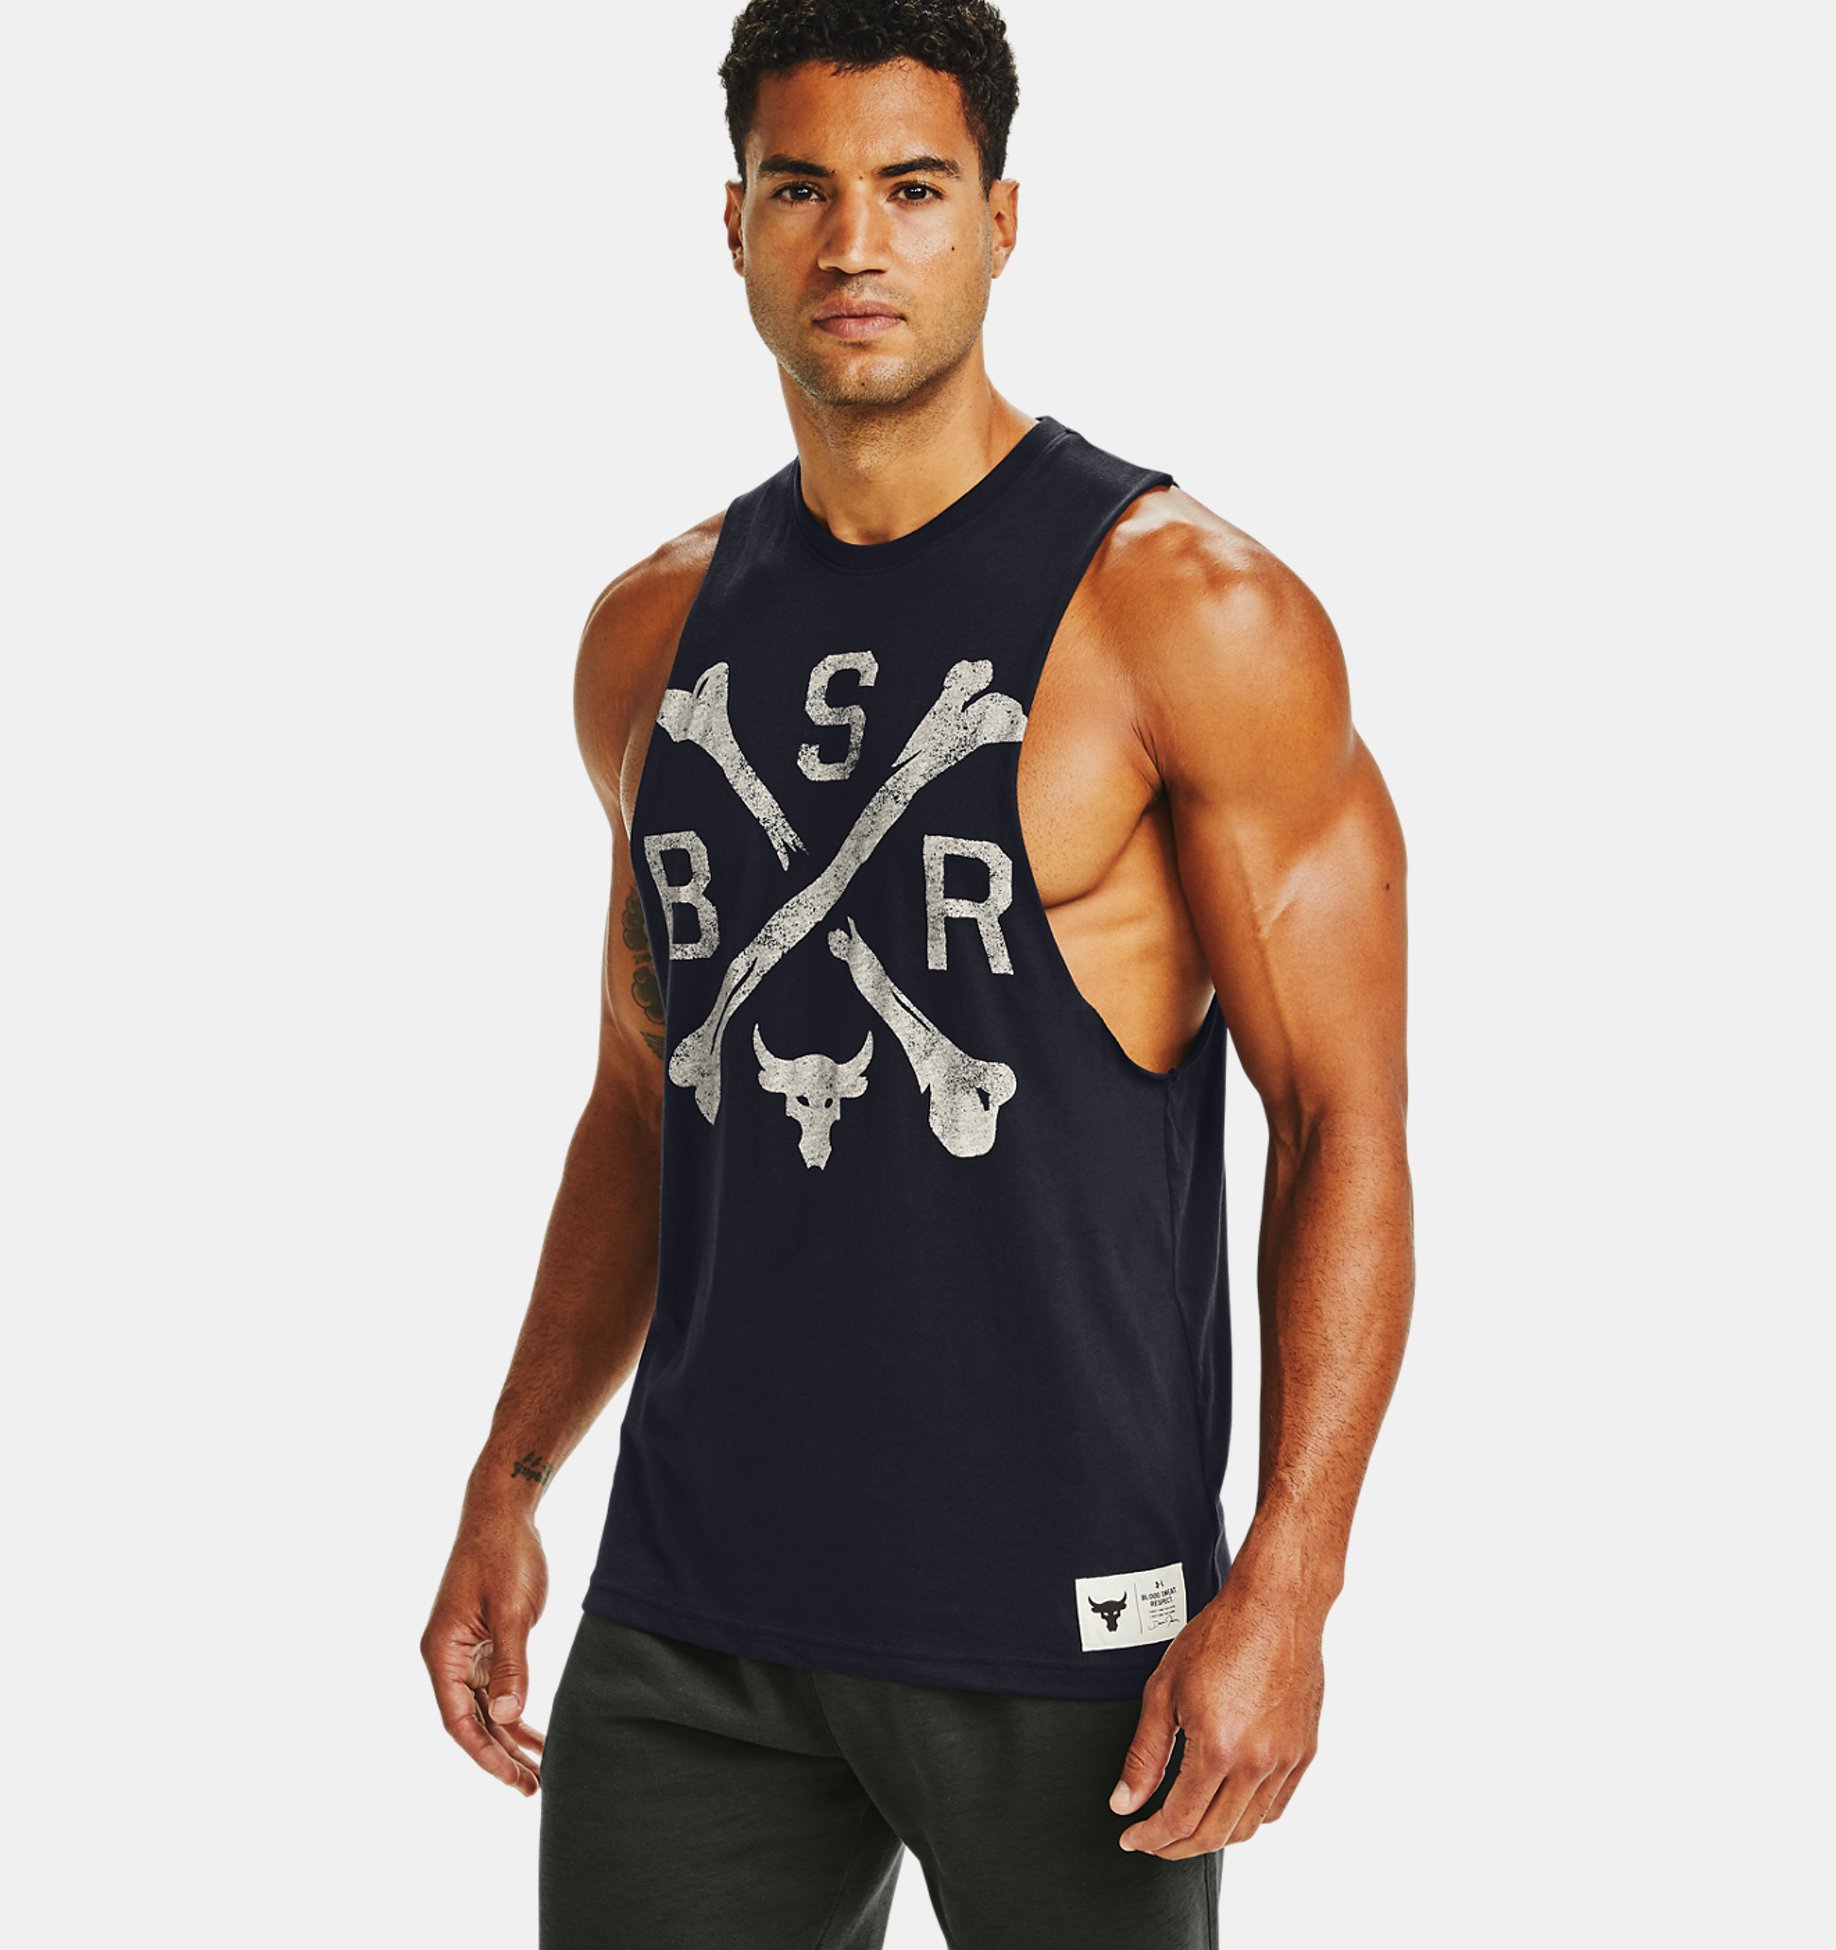 Men's Tank Tops Headphone Great for Casual and Workout/Gym Great Quality 